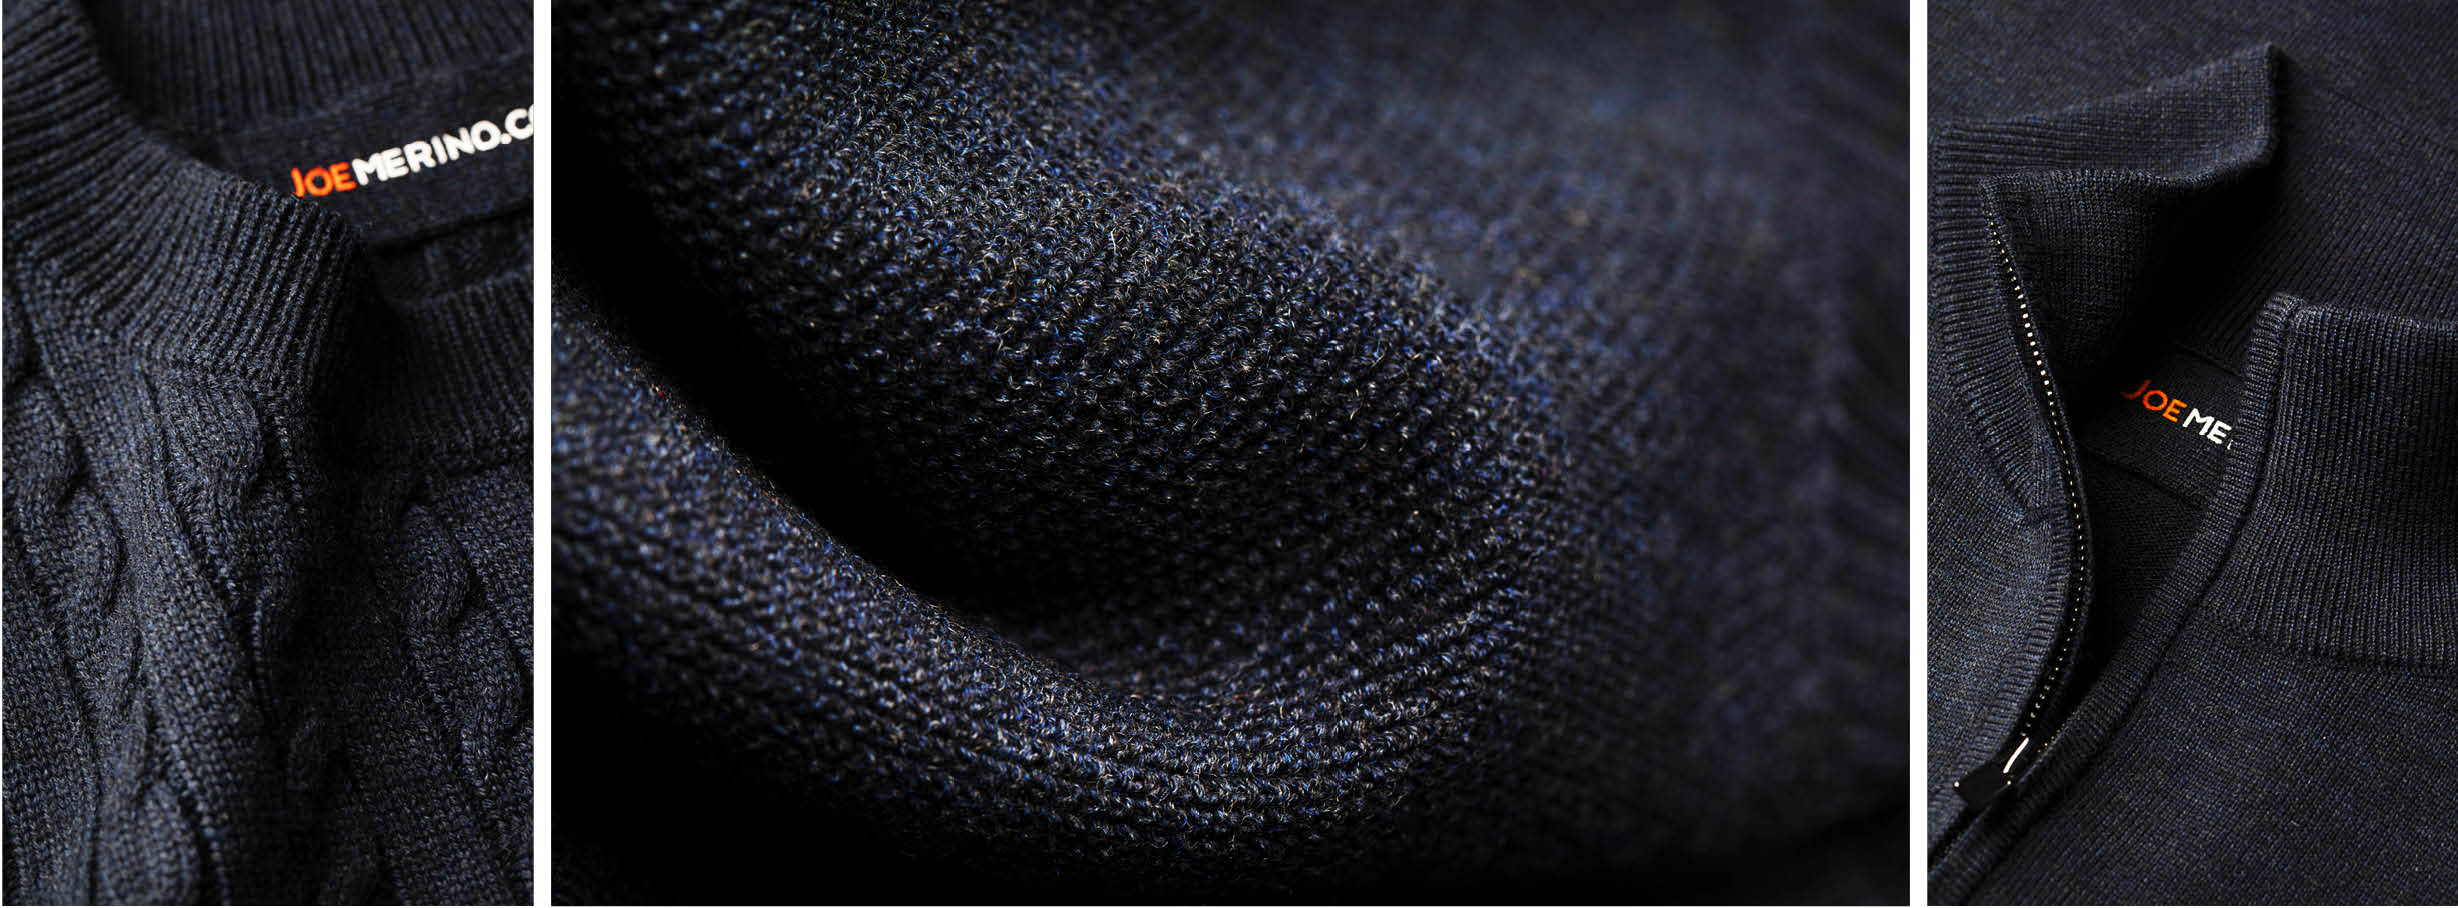 Detail picture of a thick sweater